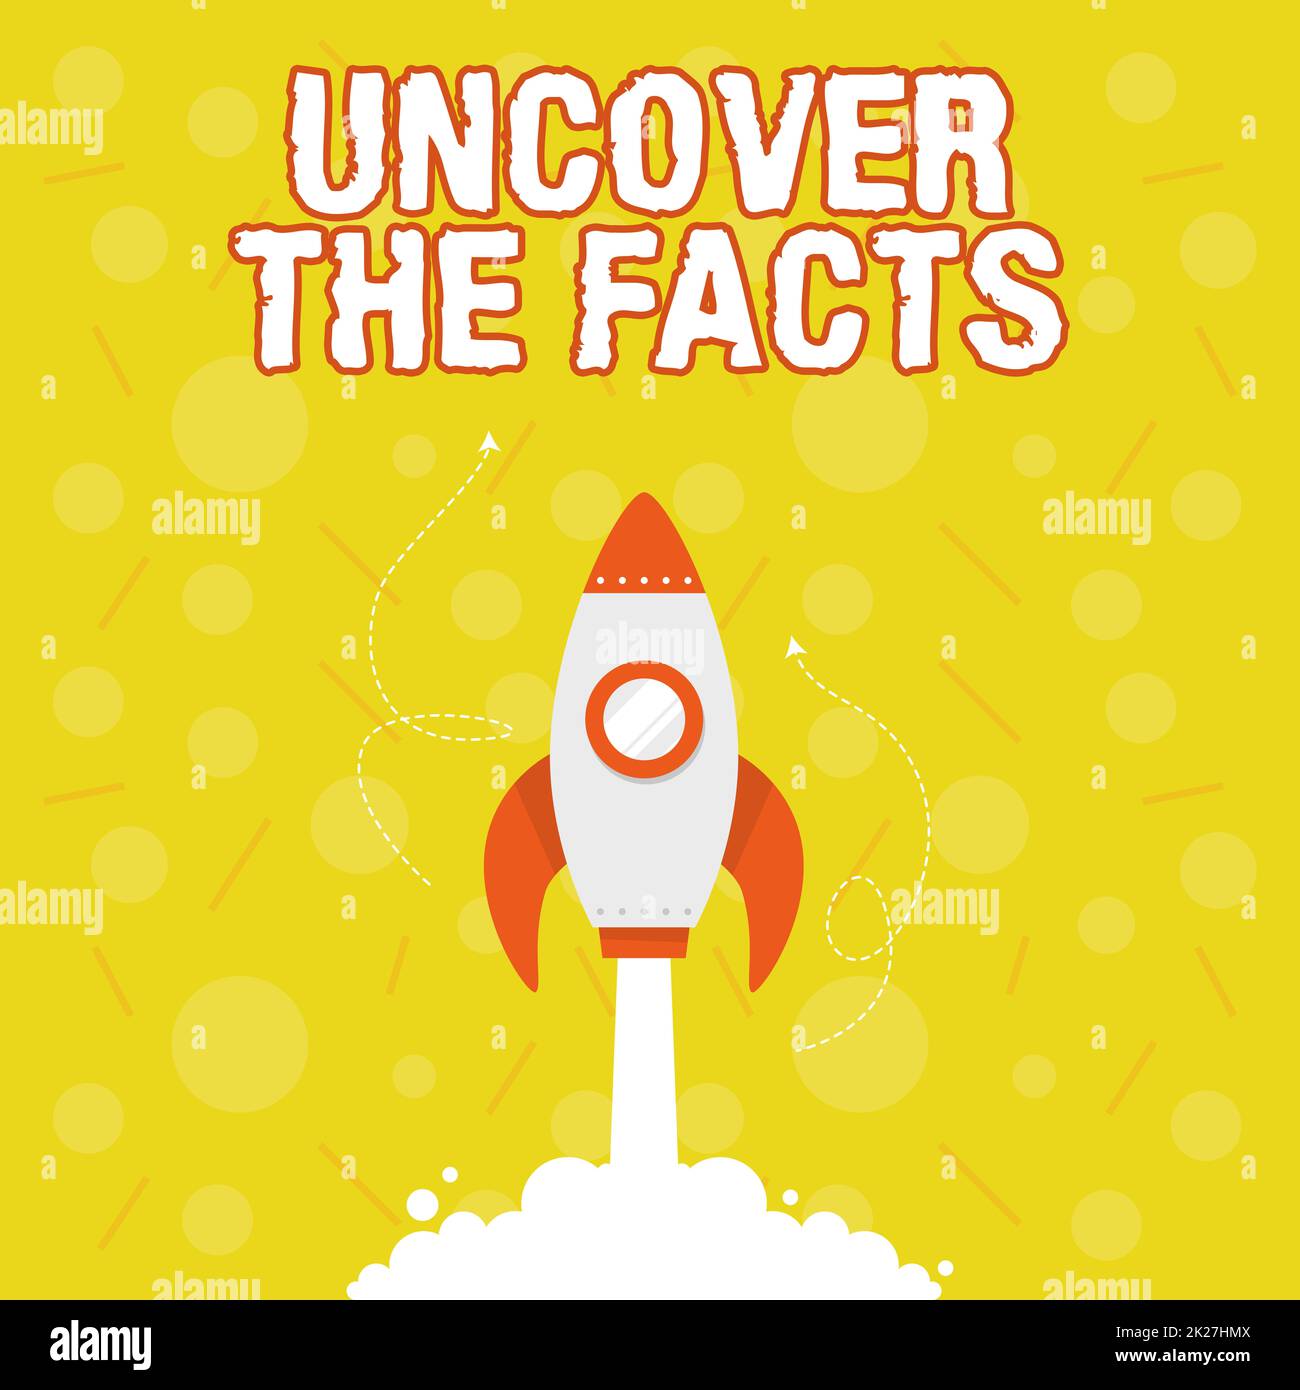 Text showing inspiration Uncover The Facts. Business approach Find the truth and evidence investigate to reveal the hidden identity Illustration Of Rocket Ship Launching Fast Straight Up To The Outer Space. Stock Photo